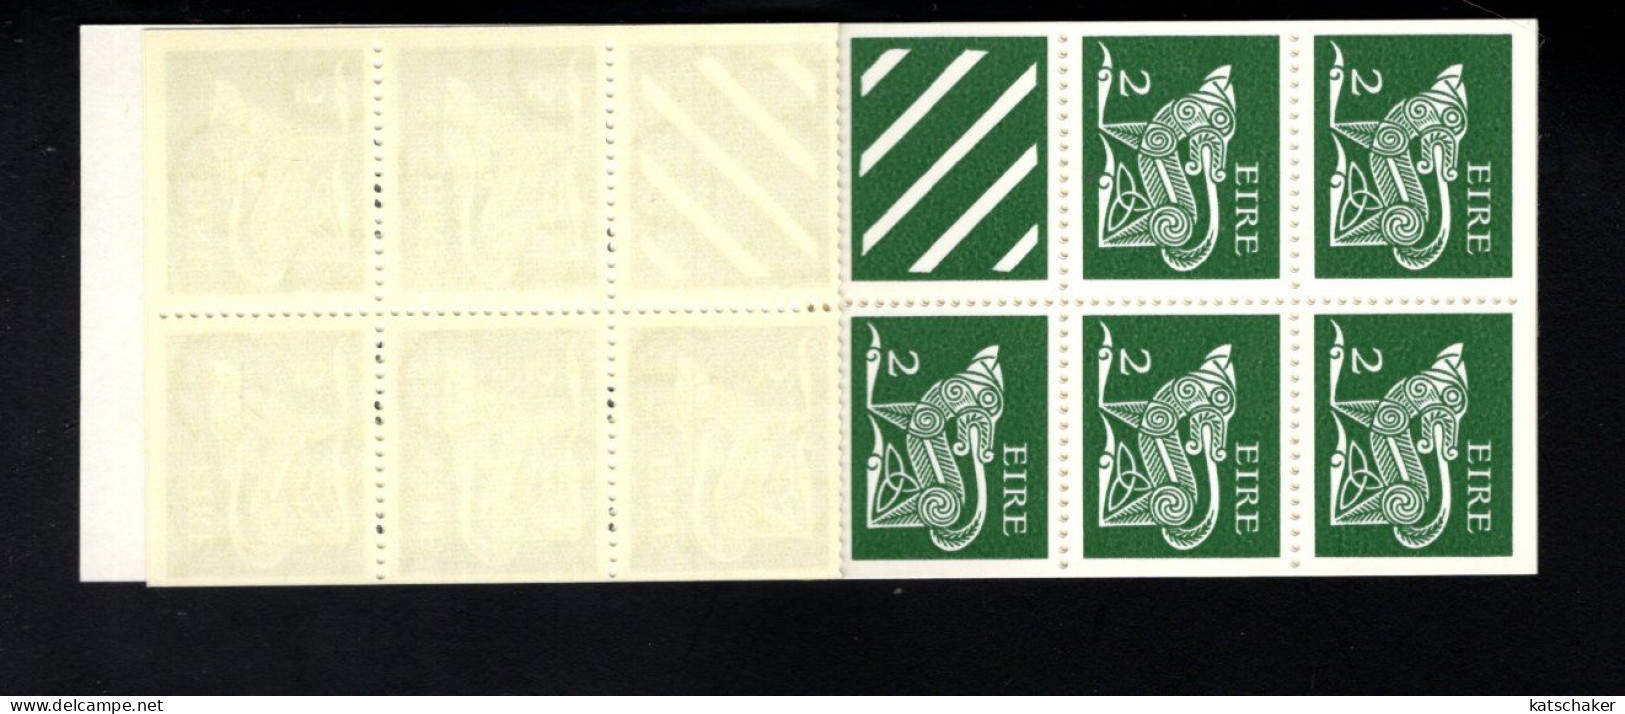 2001018791 1975  SCOTT 293B + 298D (XX) POSTFRIS  MINT NEVER HINGED - COMPLETE BOOKLET WITH PANE 293B + B298D - Unused Stamps